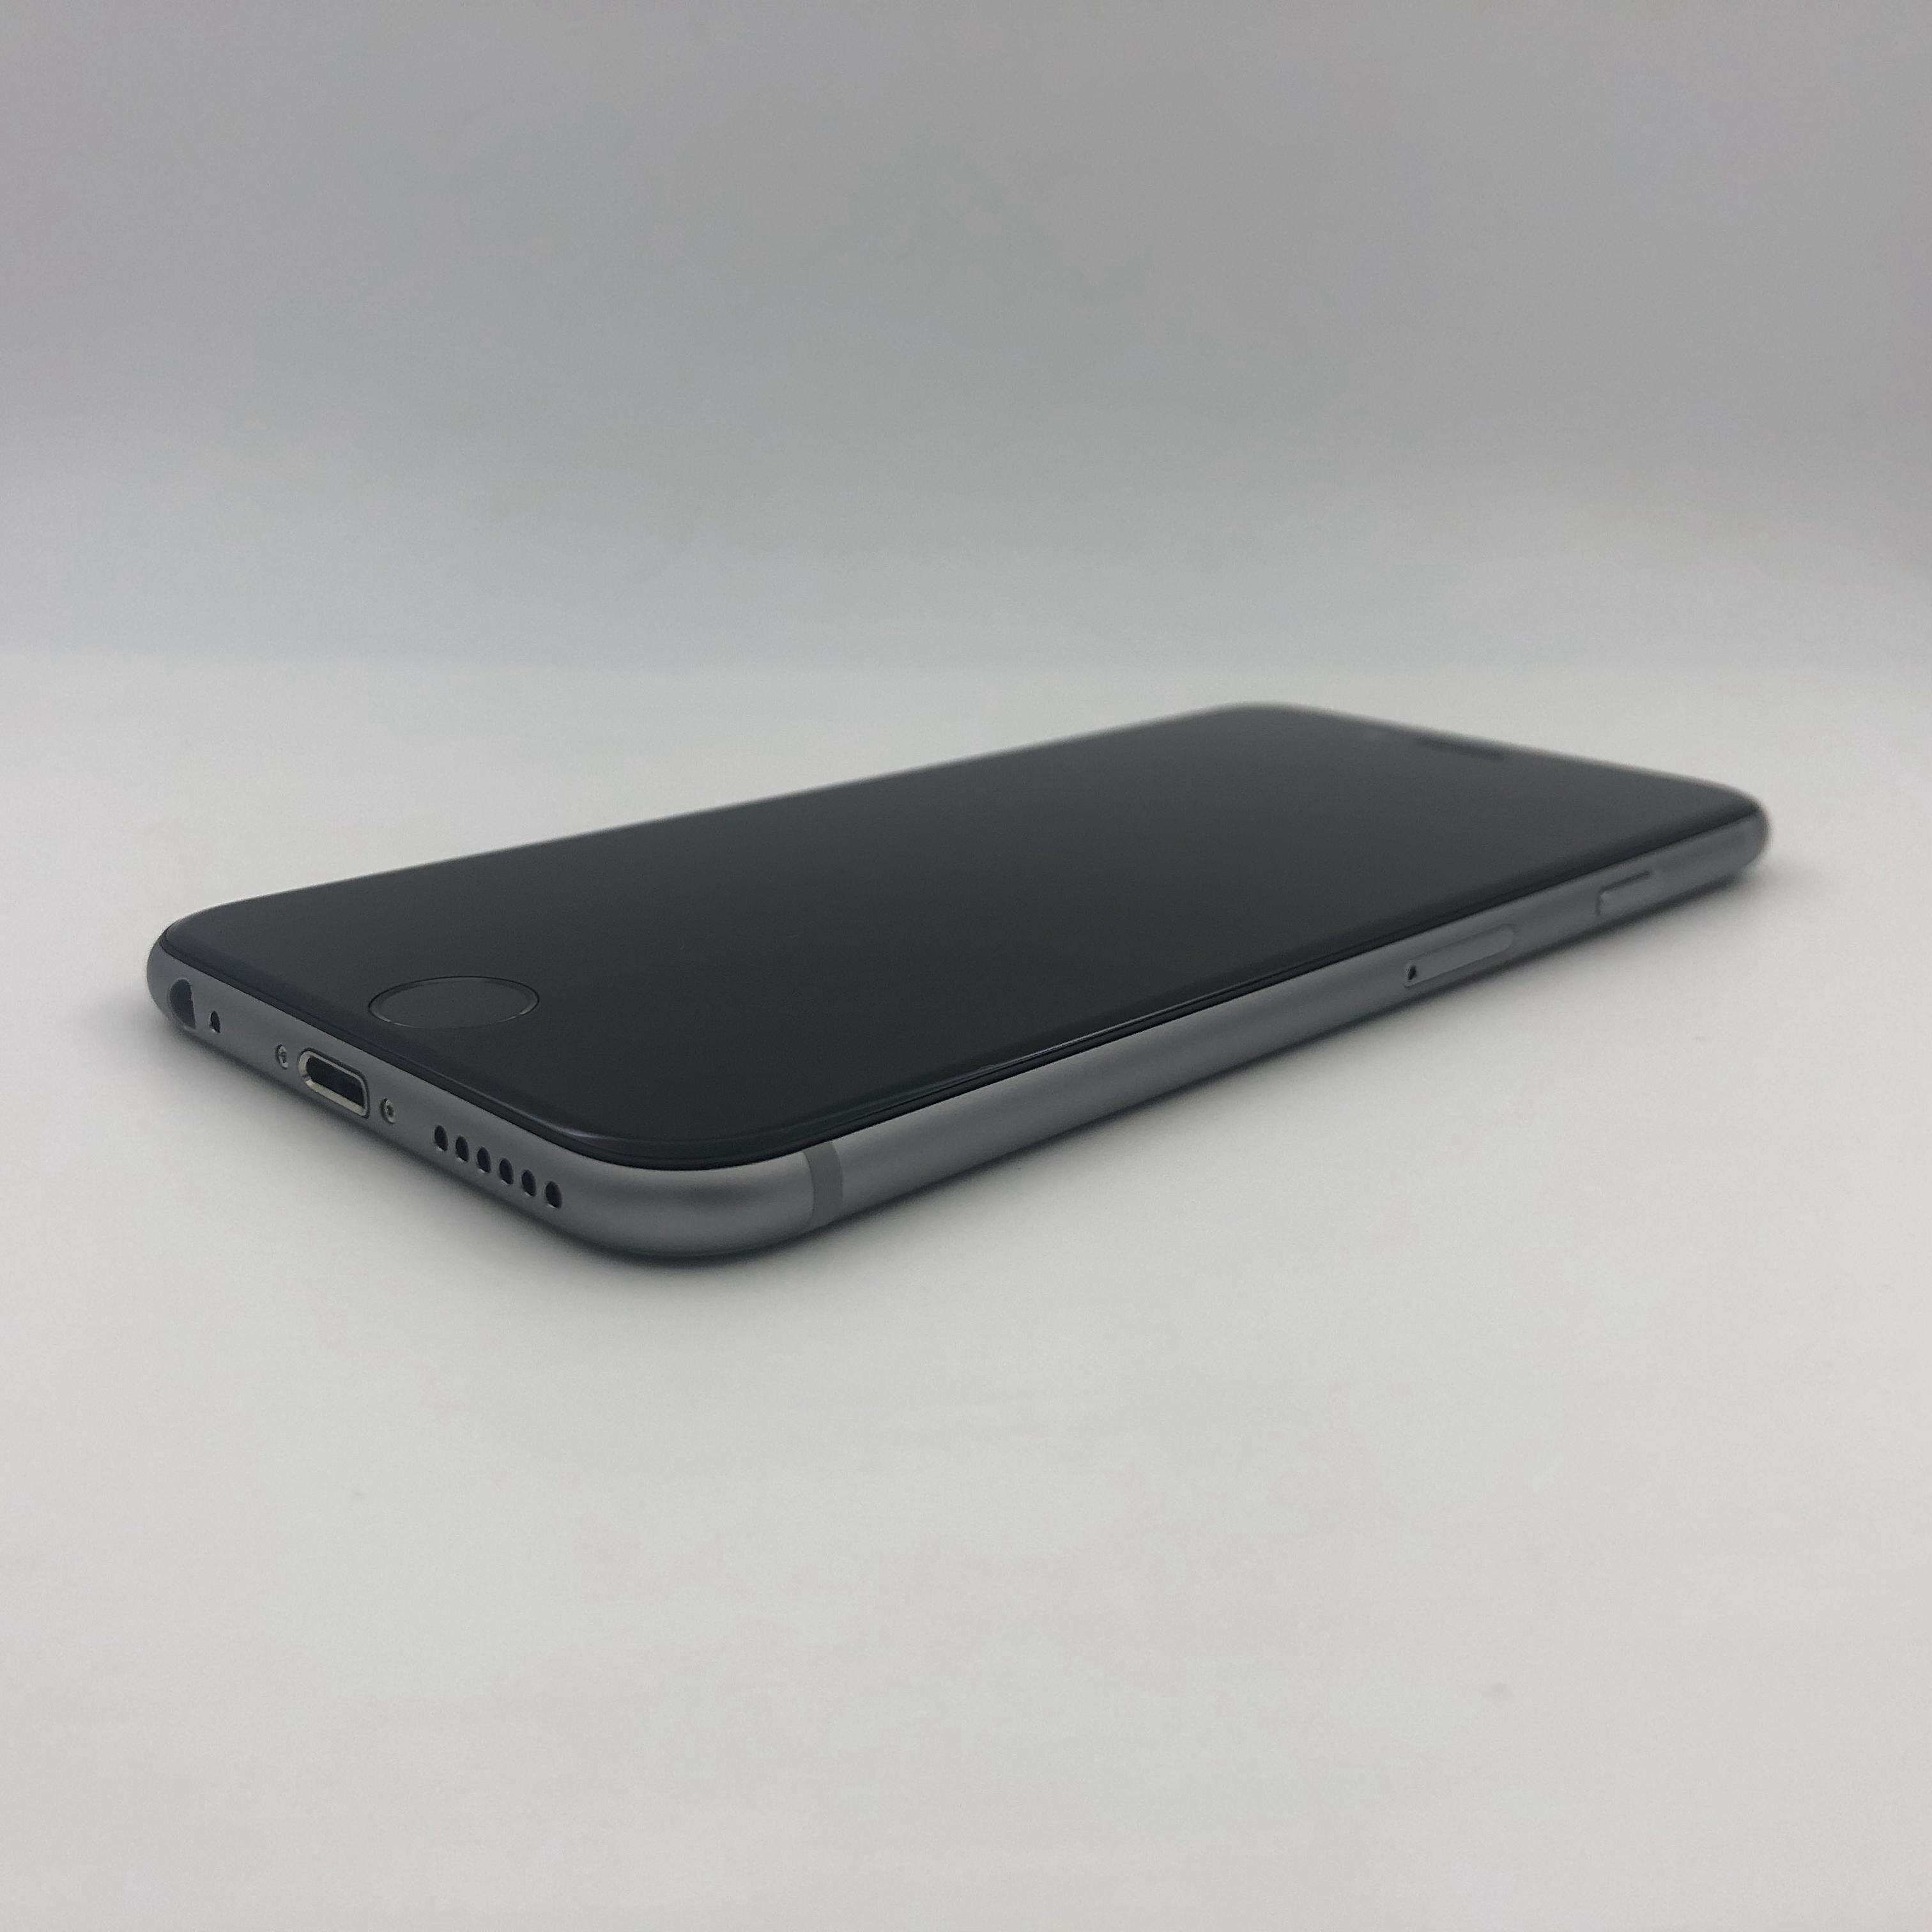 Buy iPhone 6 16GB Space Grey In Excellent Condition